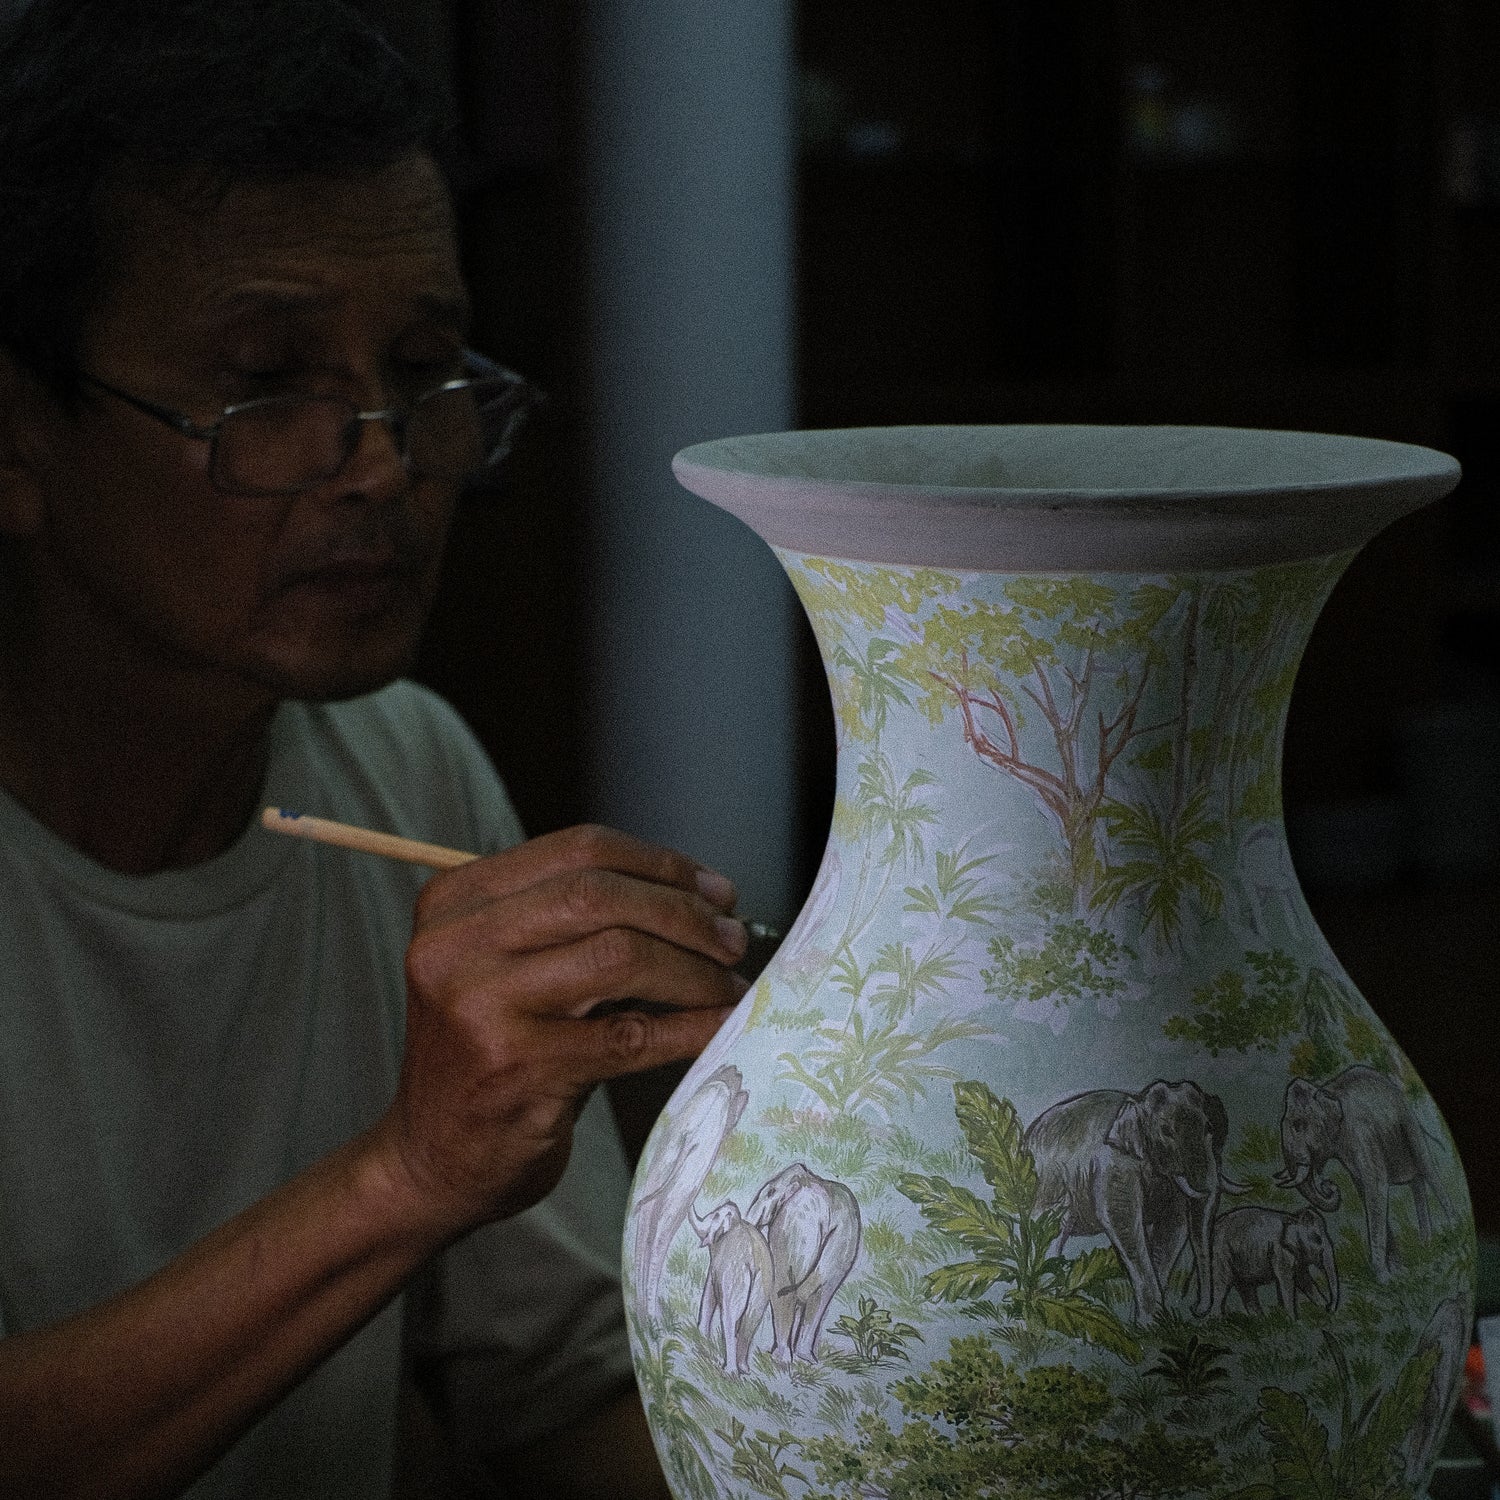 Man painting the details of the patterns for a family of elephants on a large vase